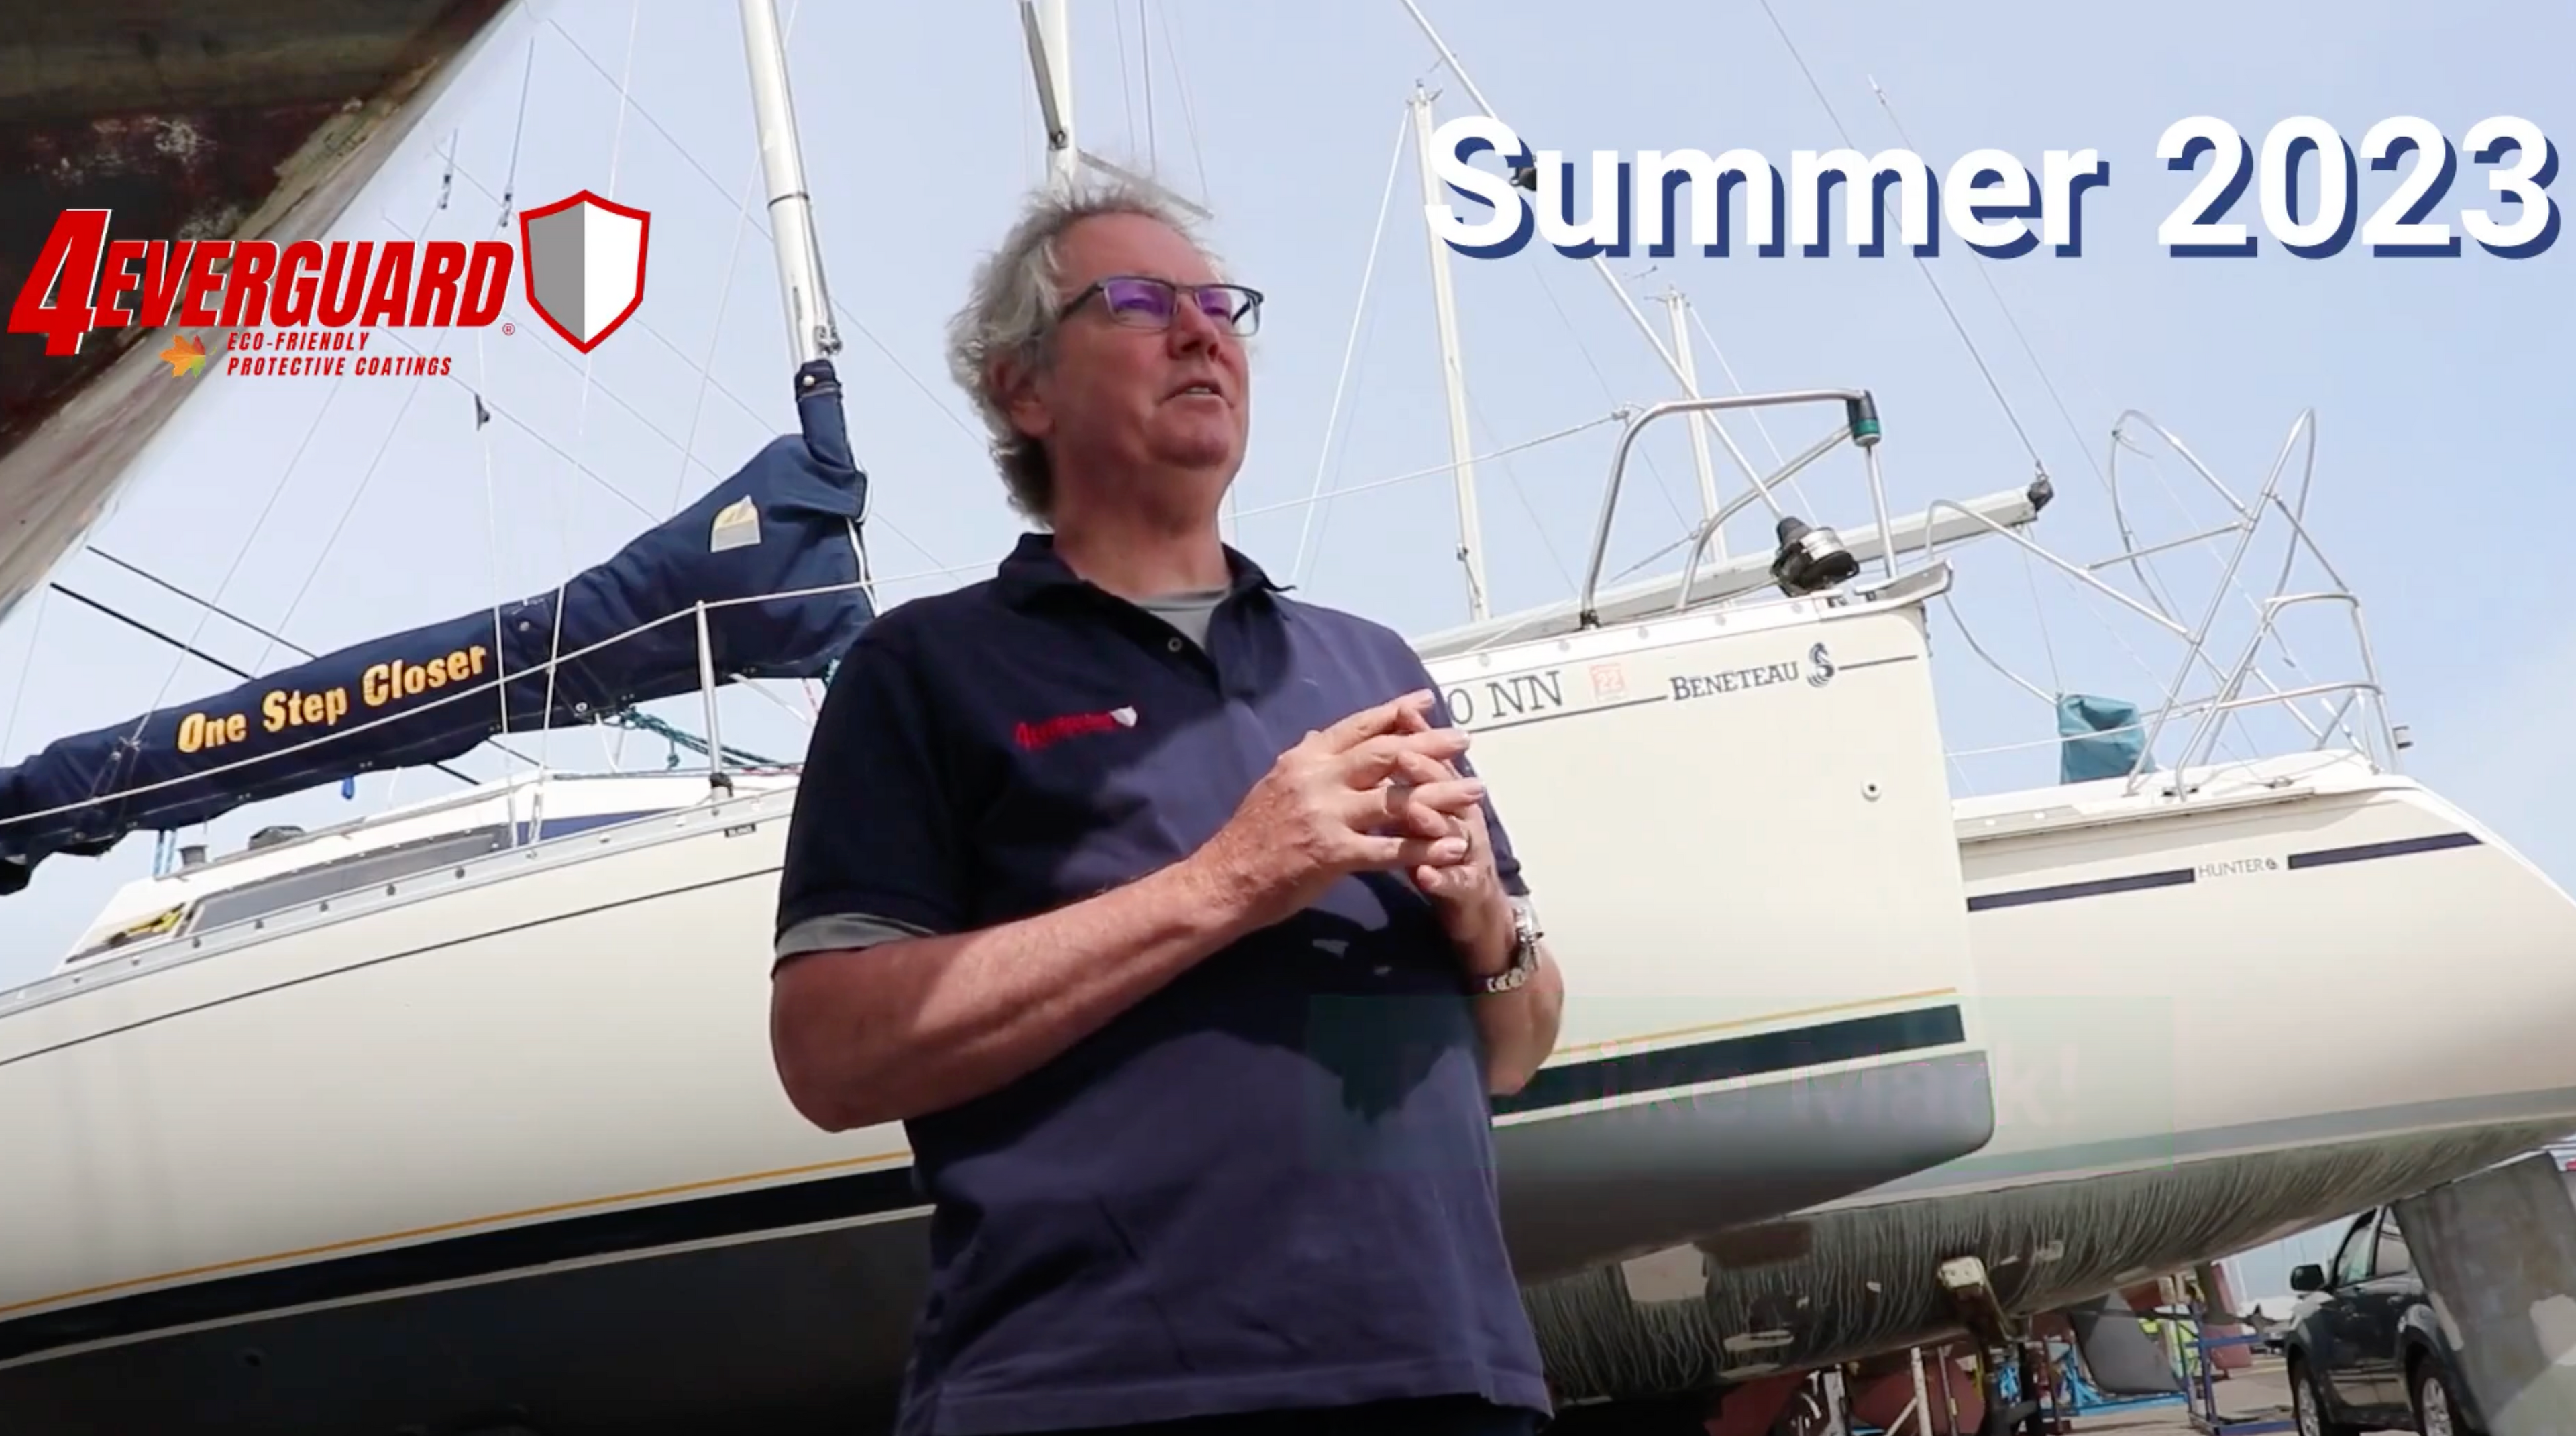 Load video: Boat Detailer in 3rd Year of 4Everguard CSP protection